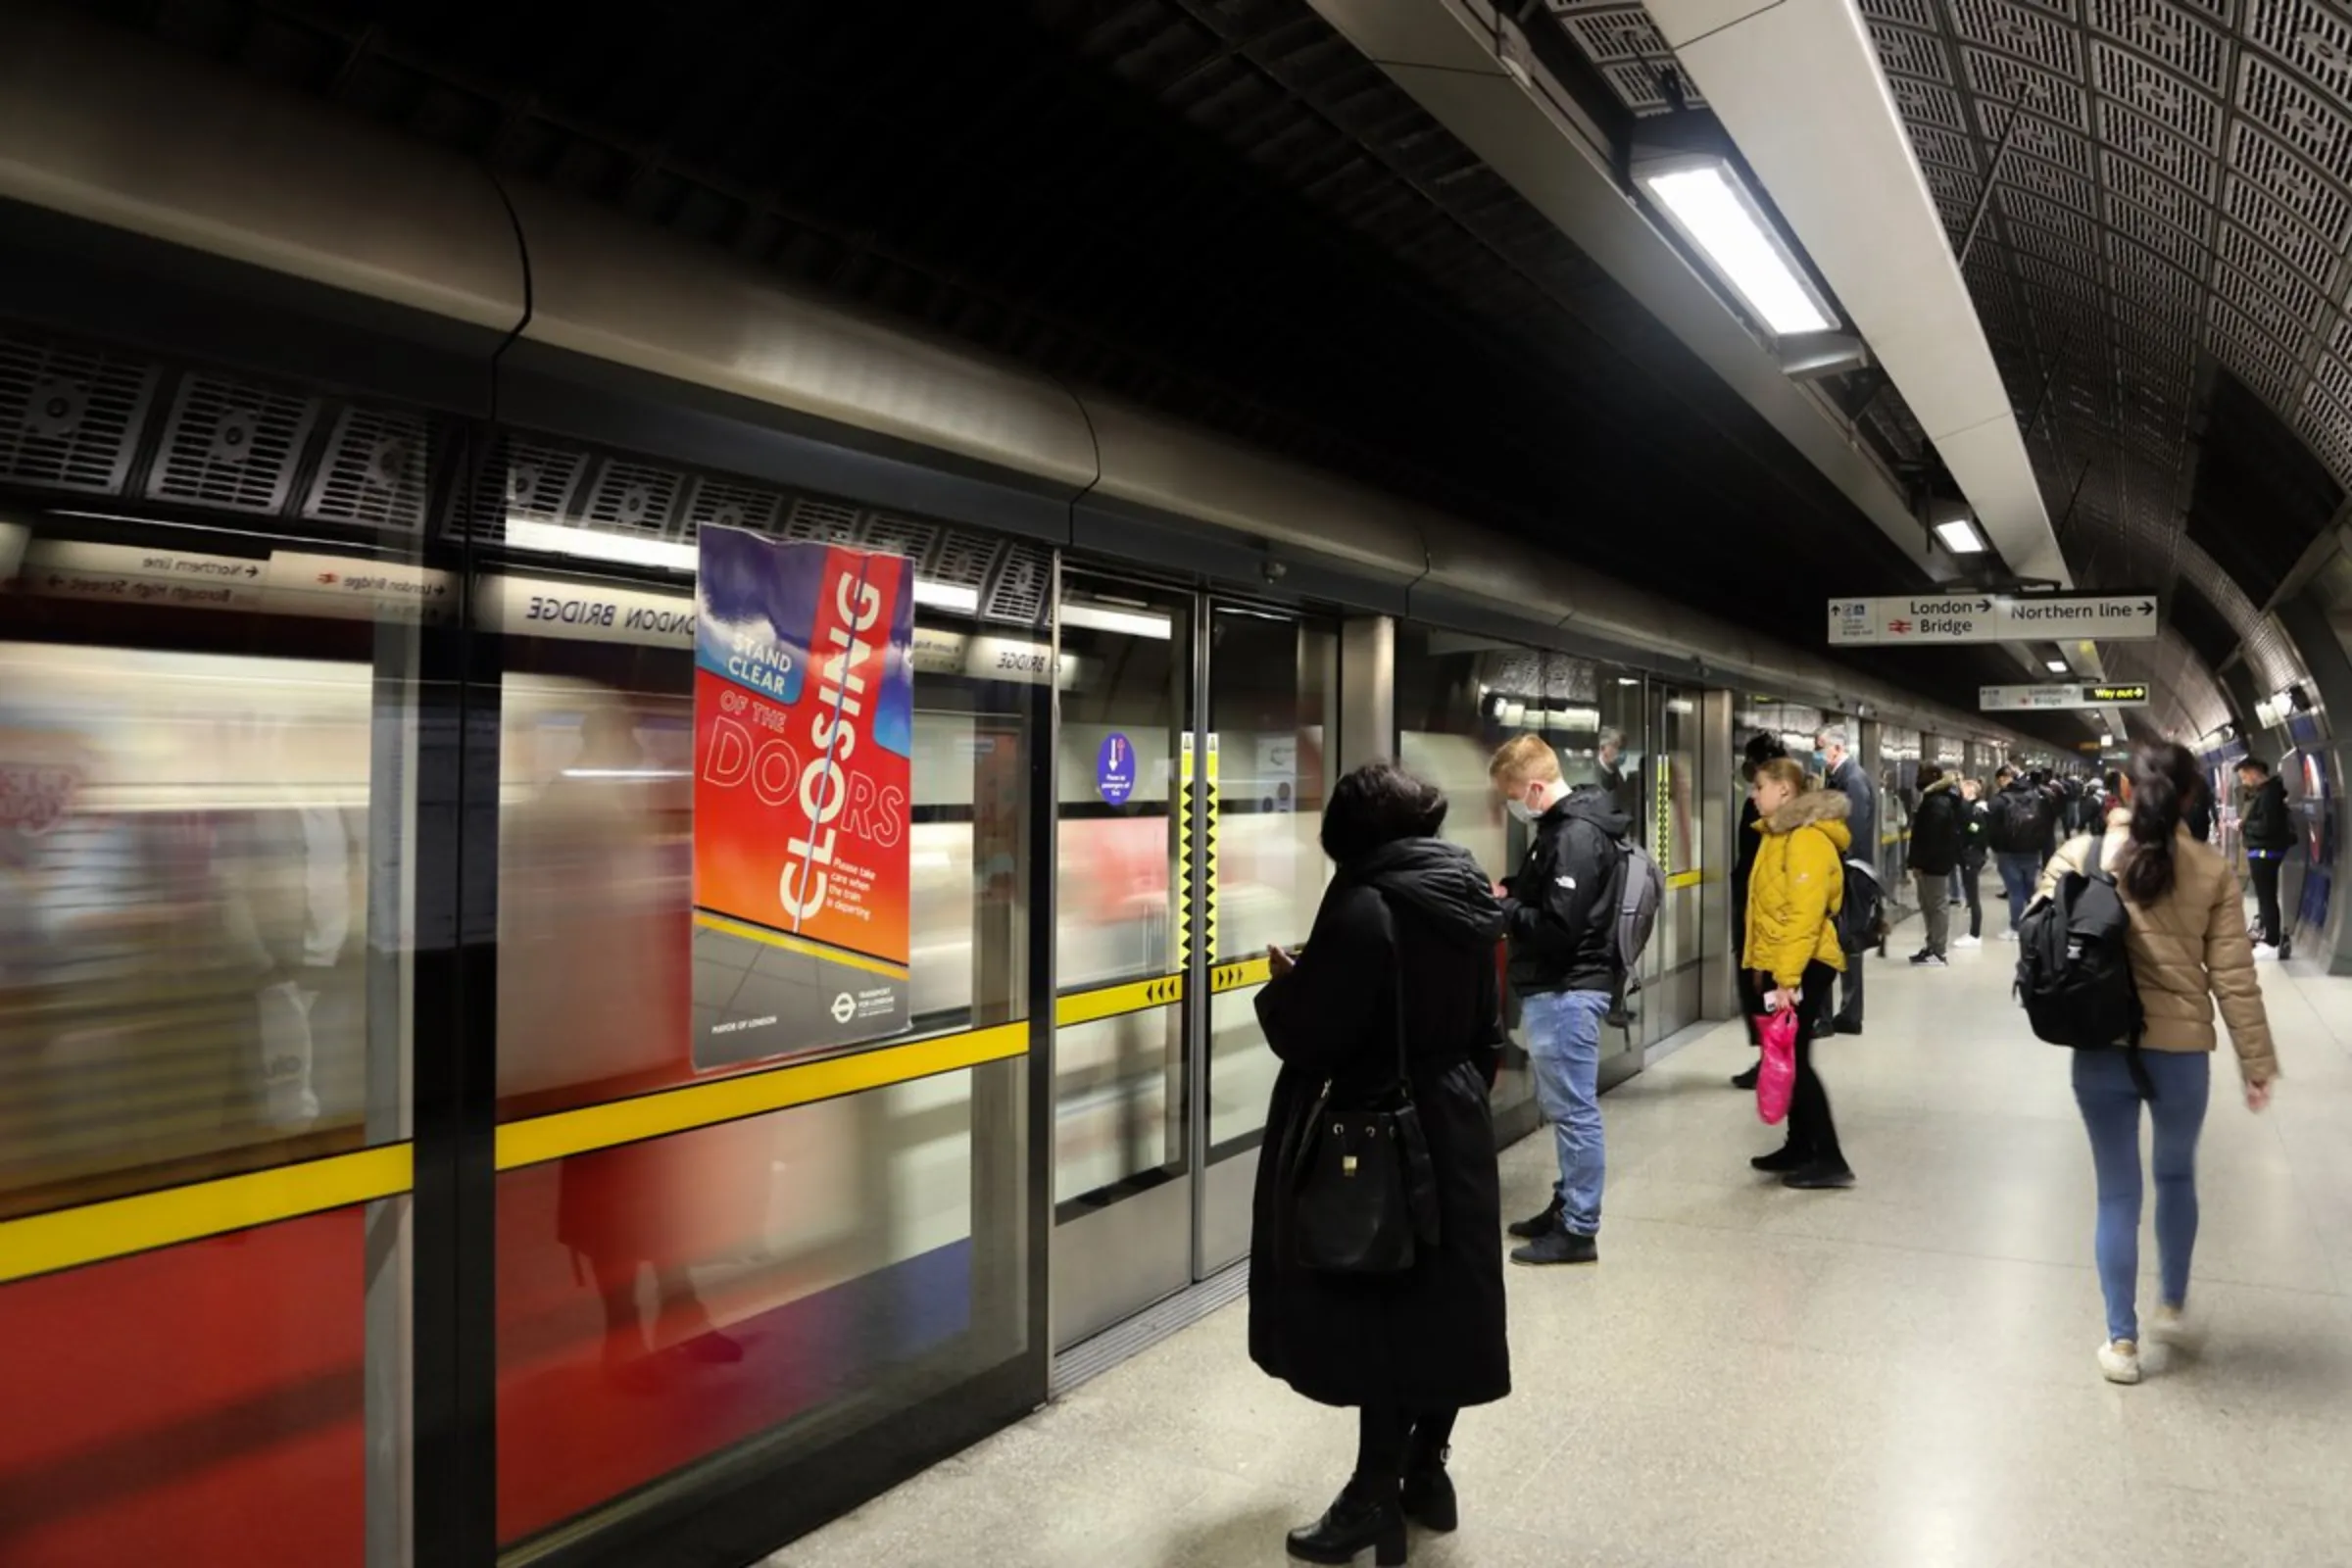 Commuters await the arrival of a Jubilee Line subway train at London Bridge Underground Station in London, England, on October 21, 2021